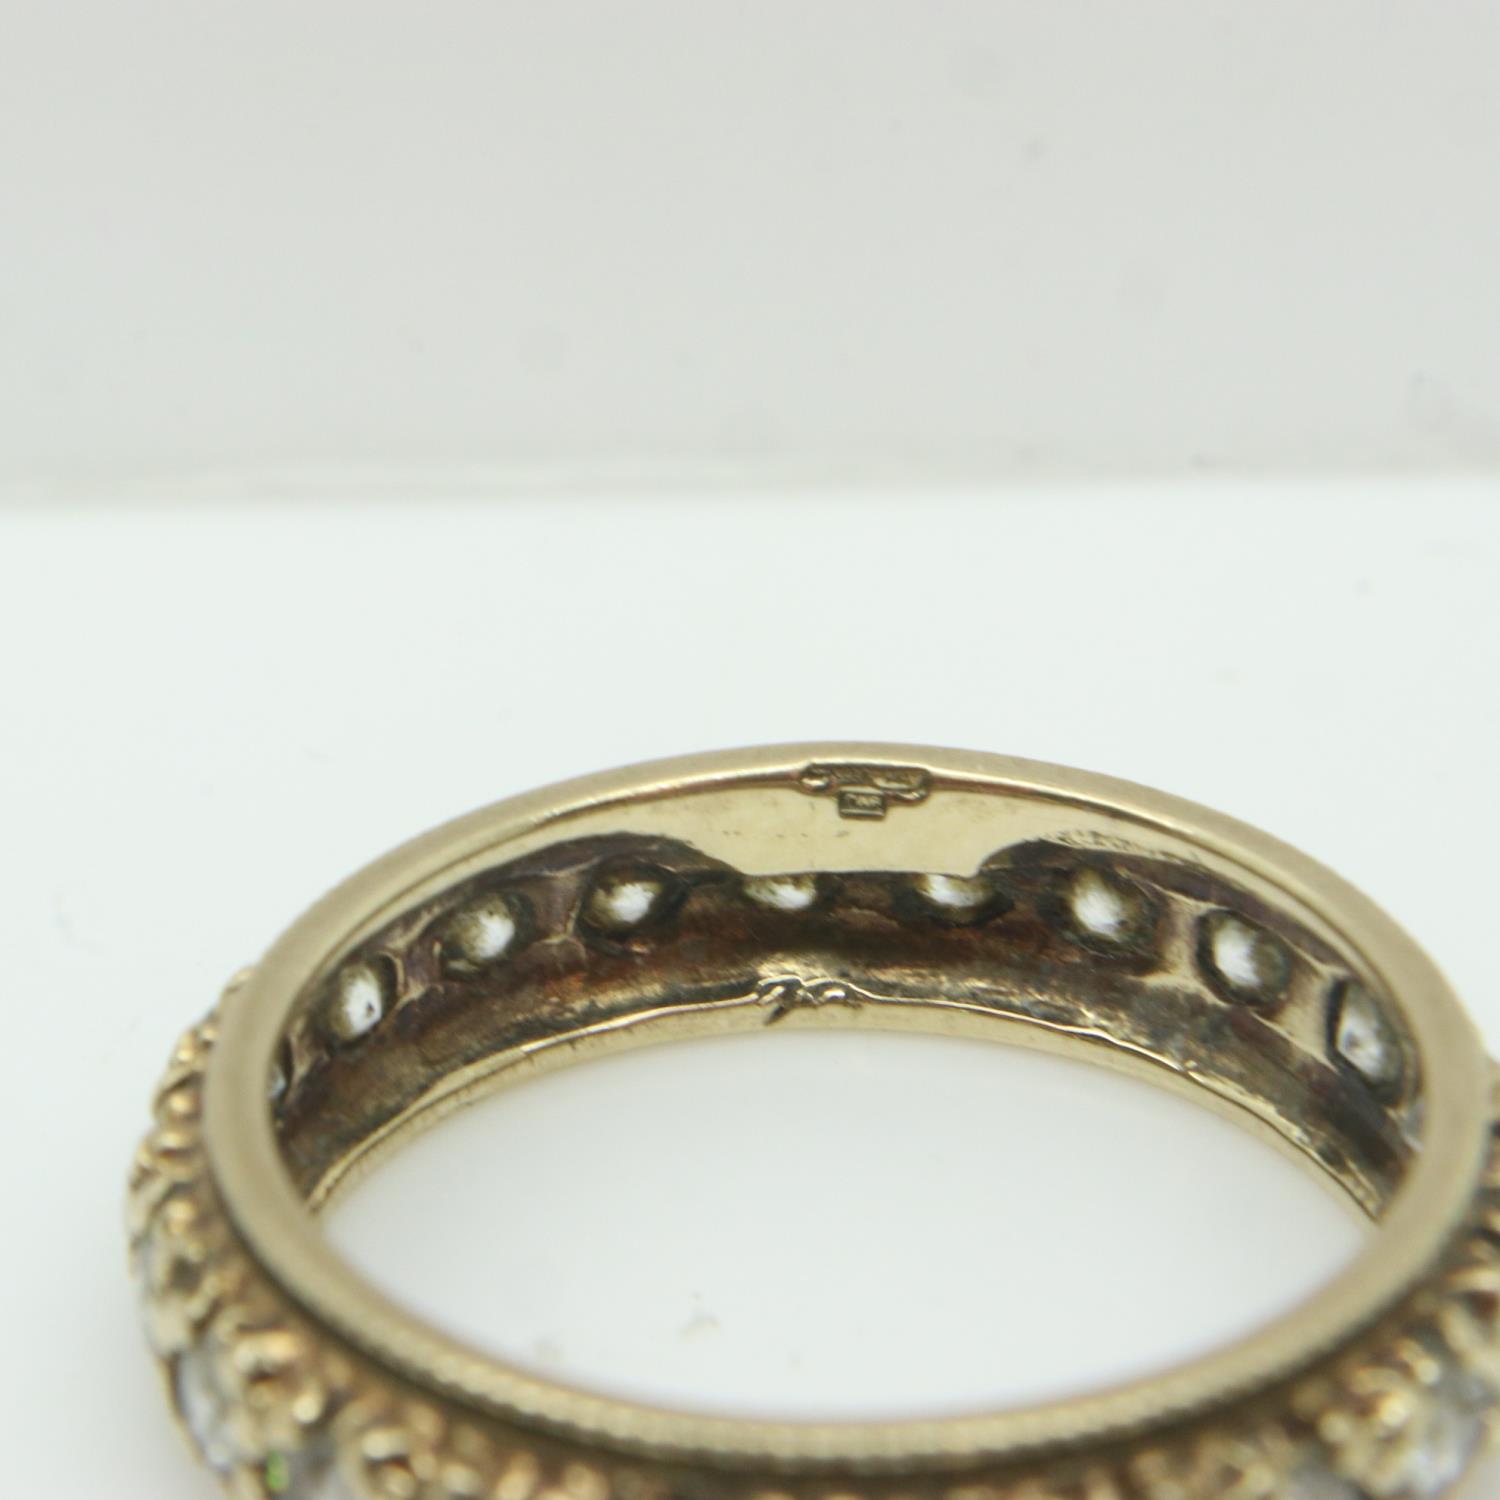 9ct gold band ring set with cubic zirconia, size K/L, 2.4g. UK P&P Group 0 (£6+VAT for the first lot - Image 3 of 3